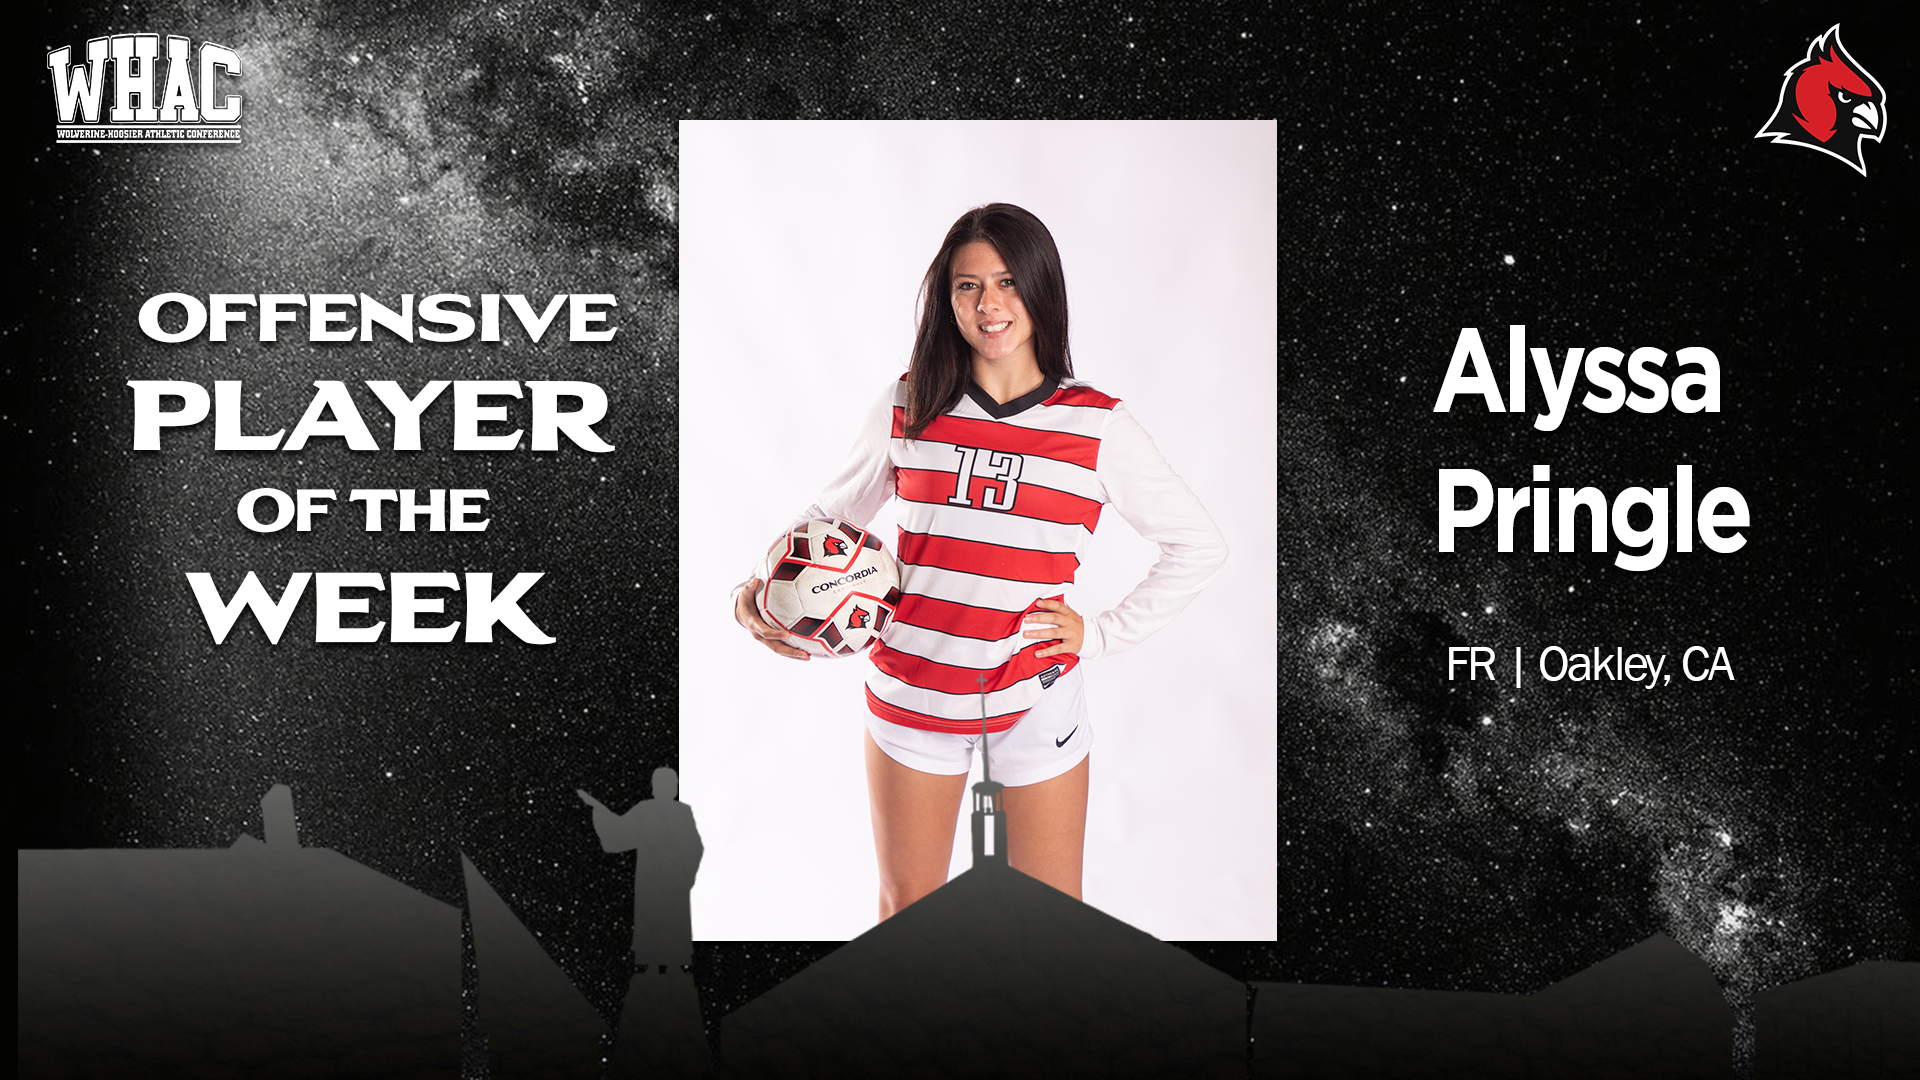 Alyssa Pringle Named WHAC Offensive Player of the Week